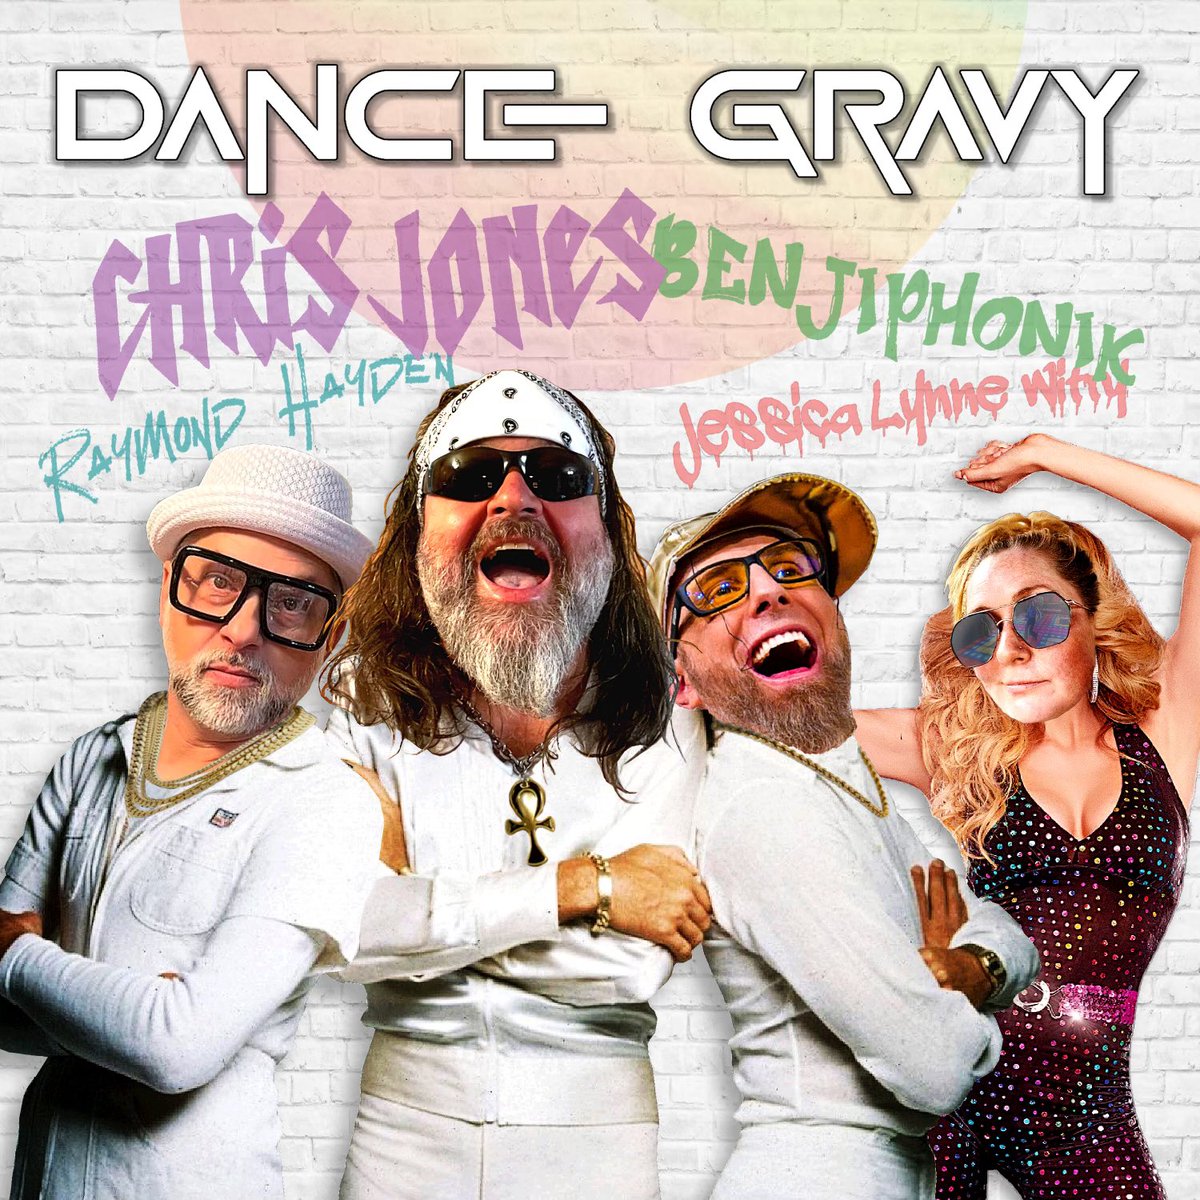 It’s Release Day! 🎶🪩
Dance Gravy now available on all music streaming platforms! 
“Get up and shake your butt!”
#Download #Stream & #Addtoyourplaylist
music.apple.com/us/album/dance…

#collaboration #dancegravy #newmusicfriday #rockmusic #hiphop #dancemusic #spotify #itunes